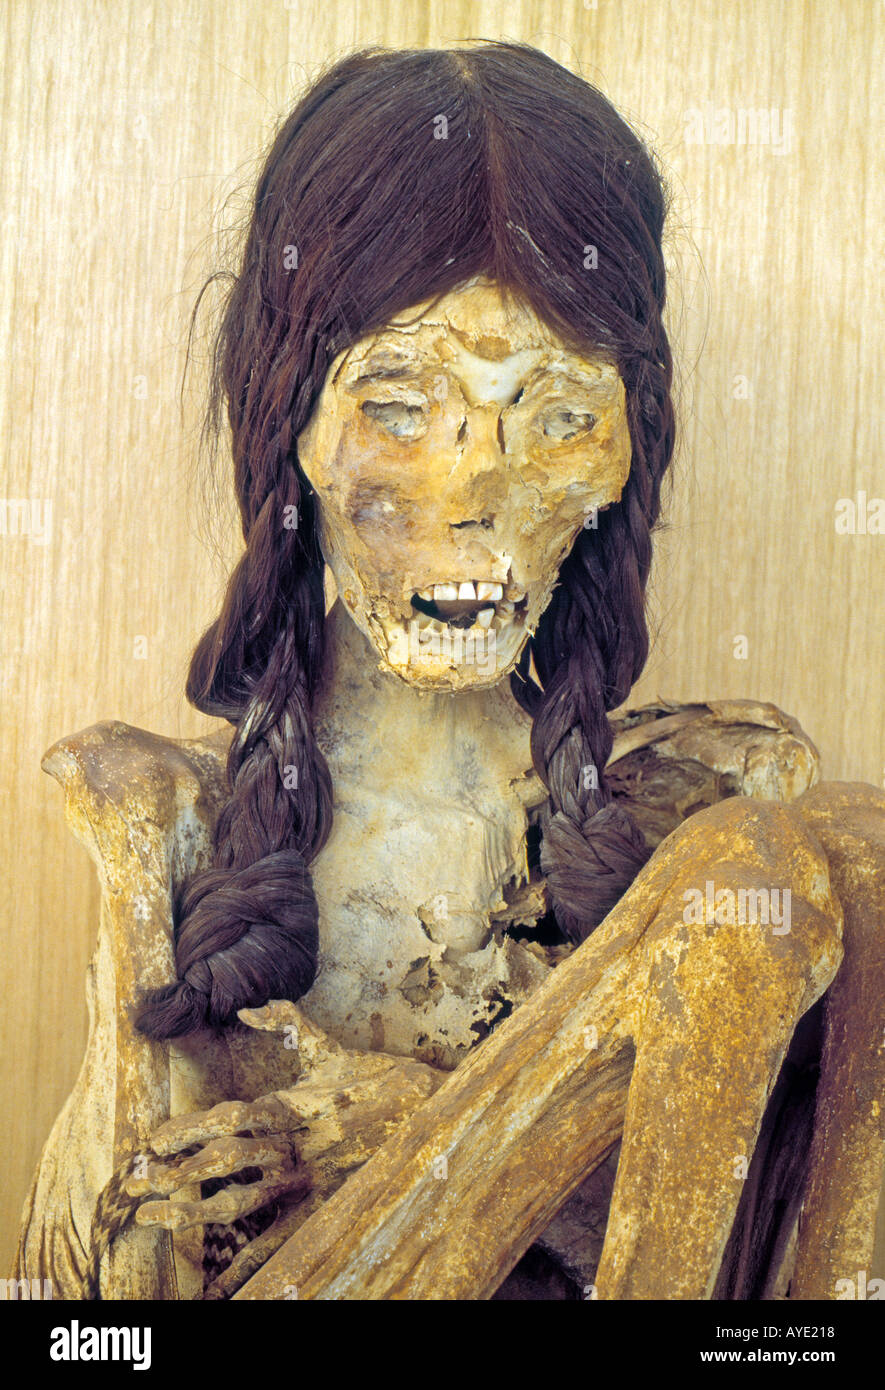 San Pedro de Atacama Chile Mummified body of young woman in Padre Le Paige Archaeological Museum Stock Photo